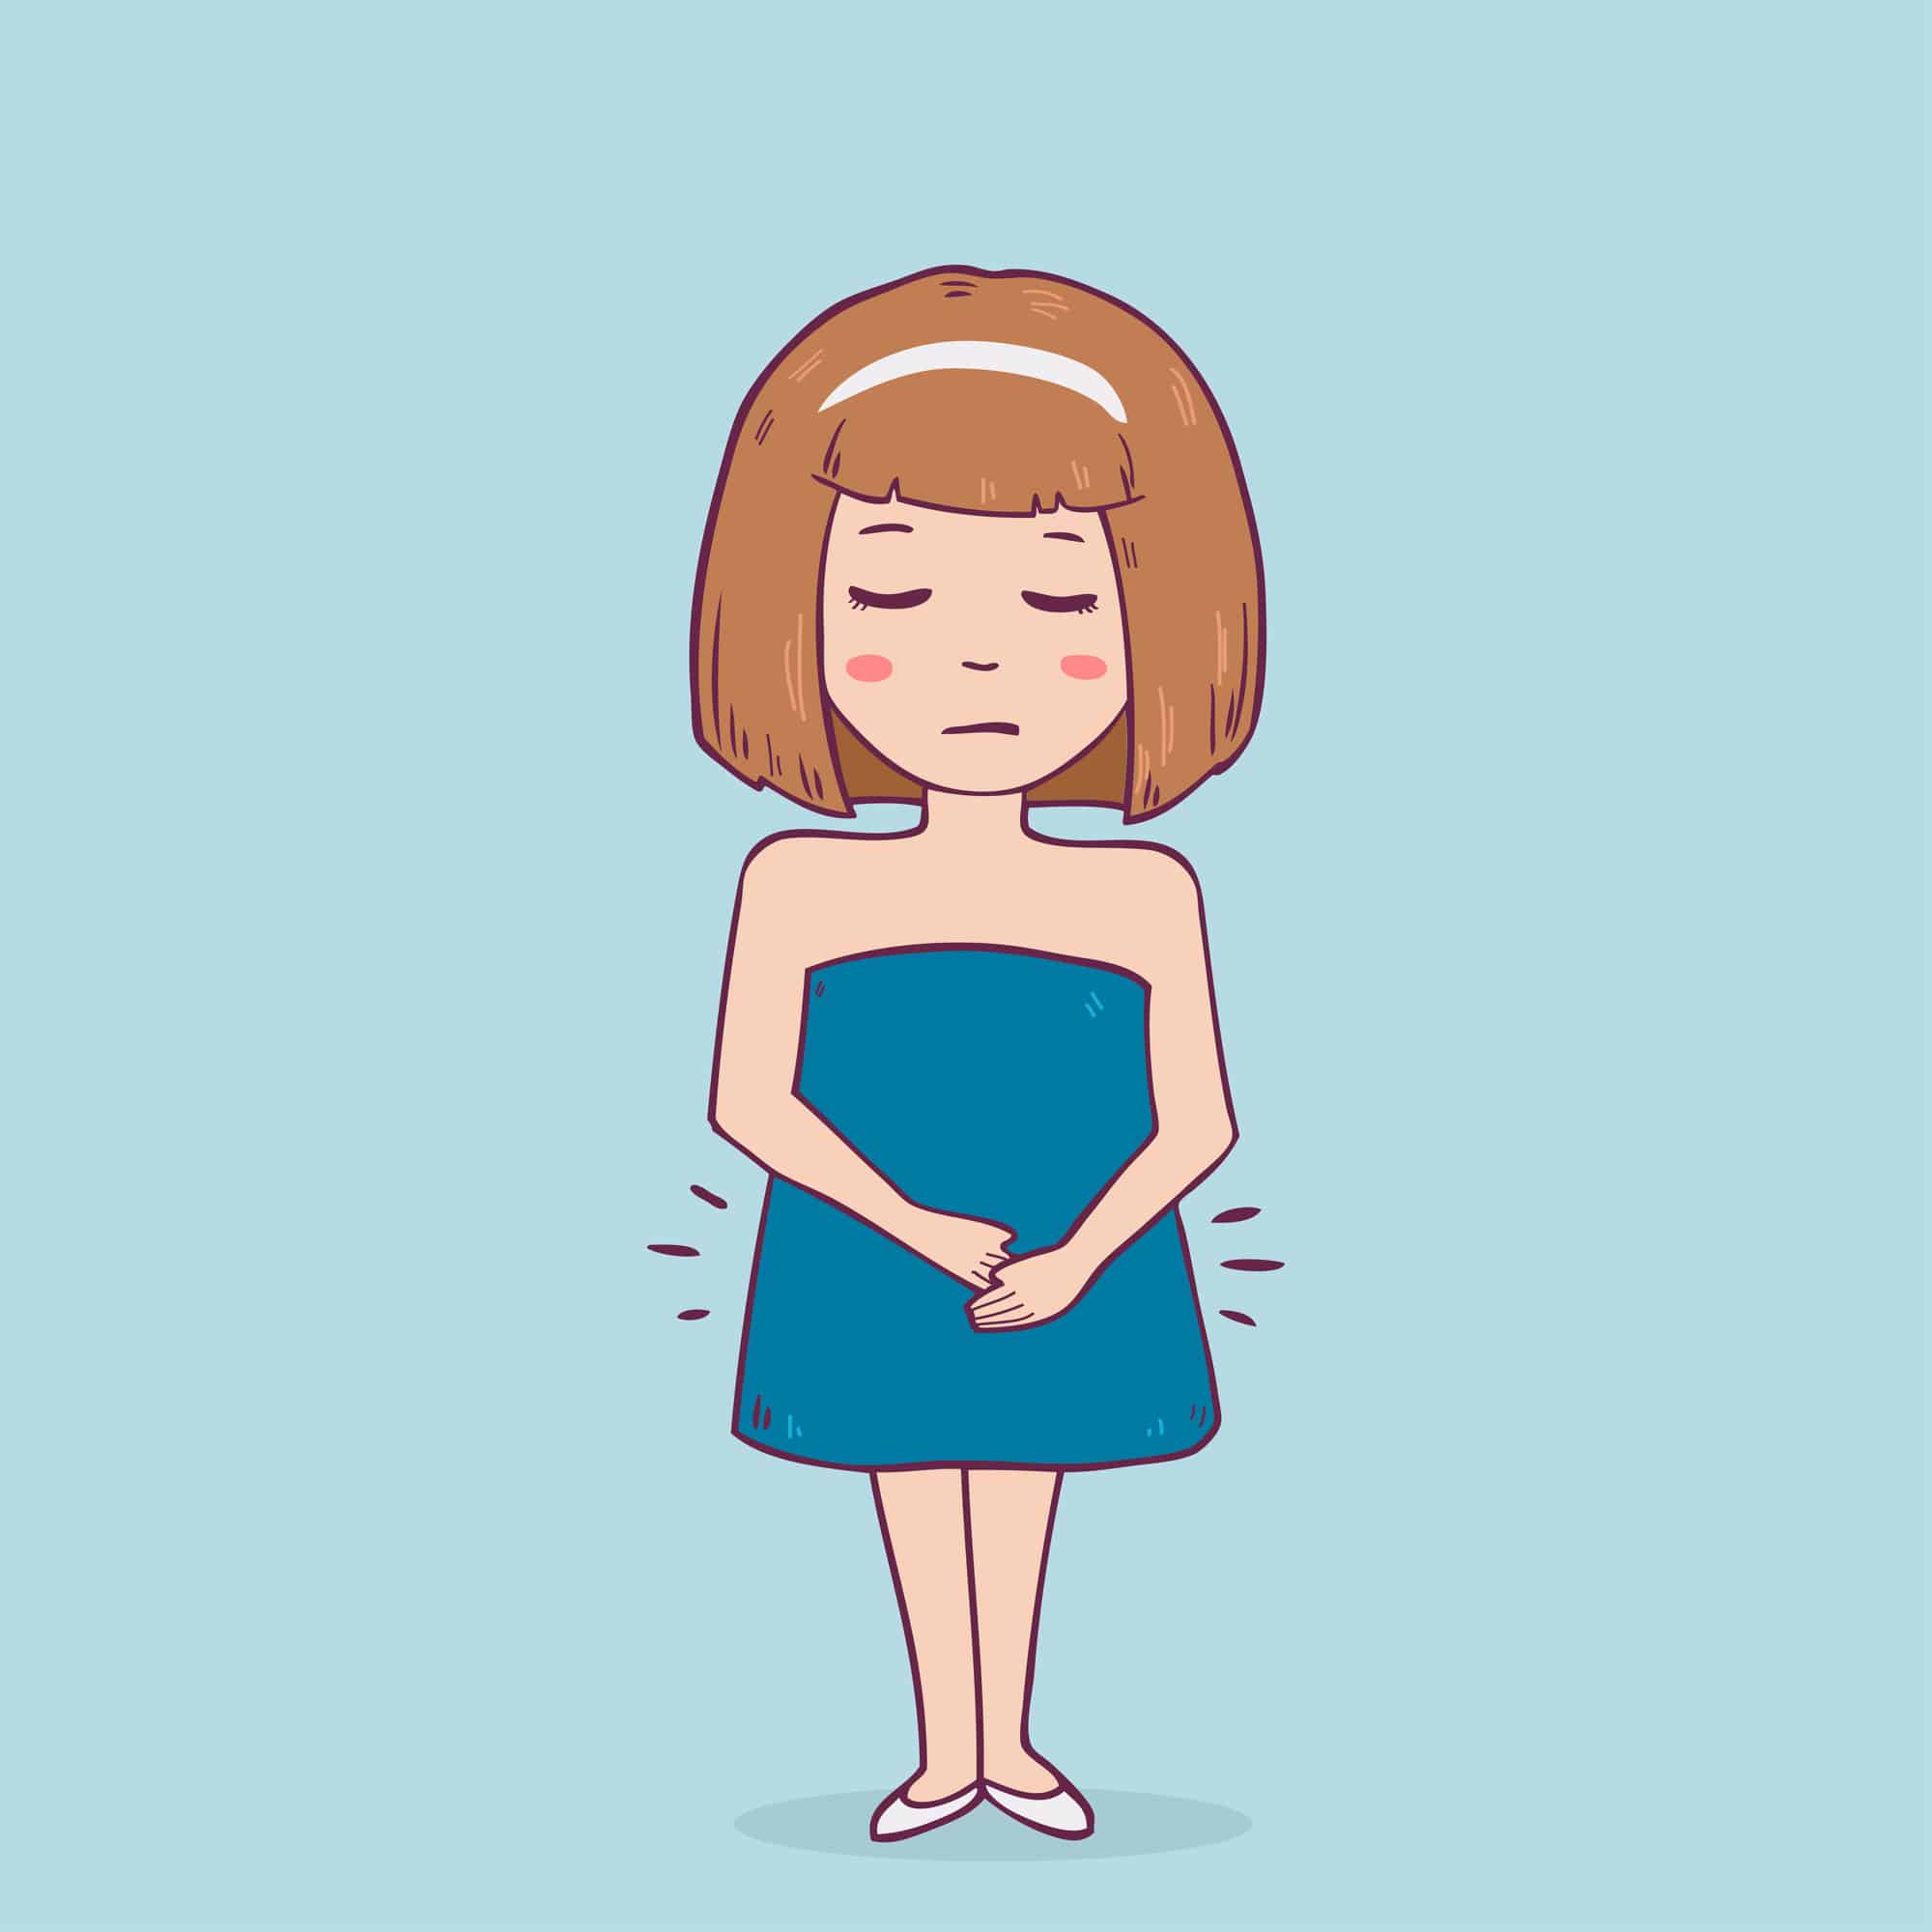 Is It Normal To Have Abdominal Pain & Stomach Pain After Pregnancy?